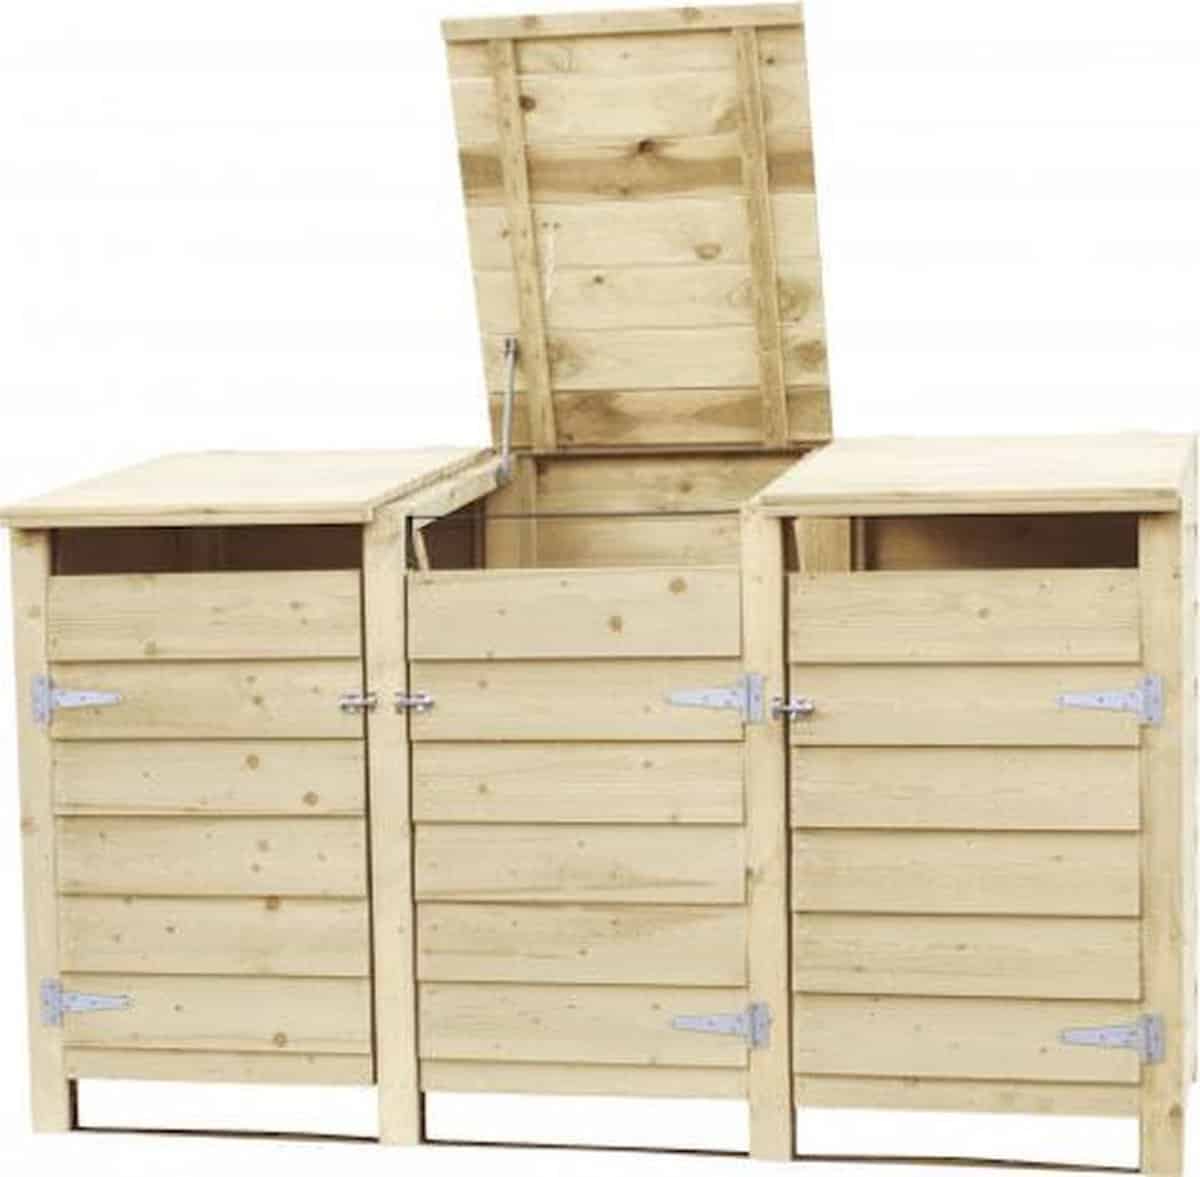 Beste-triple-containerkast-3-containers-Woodvision